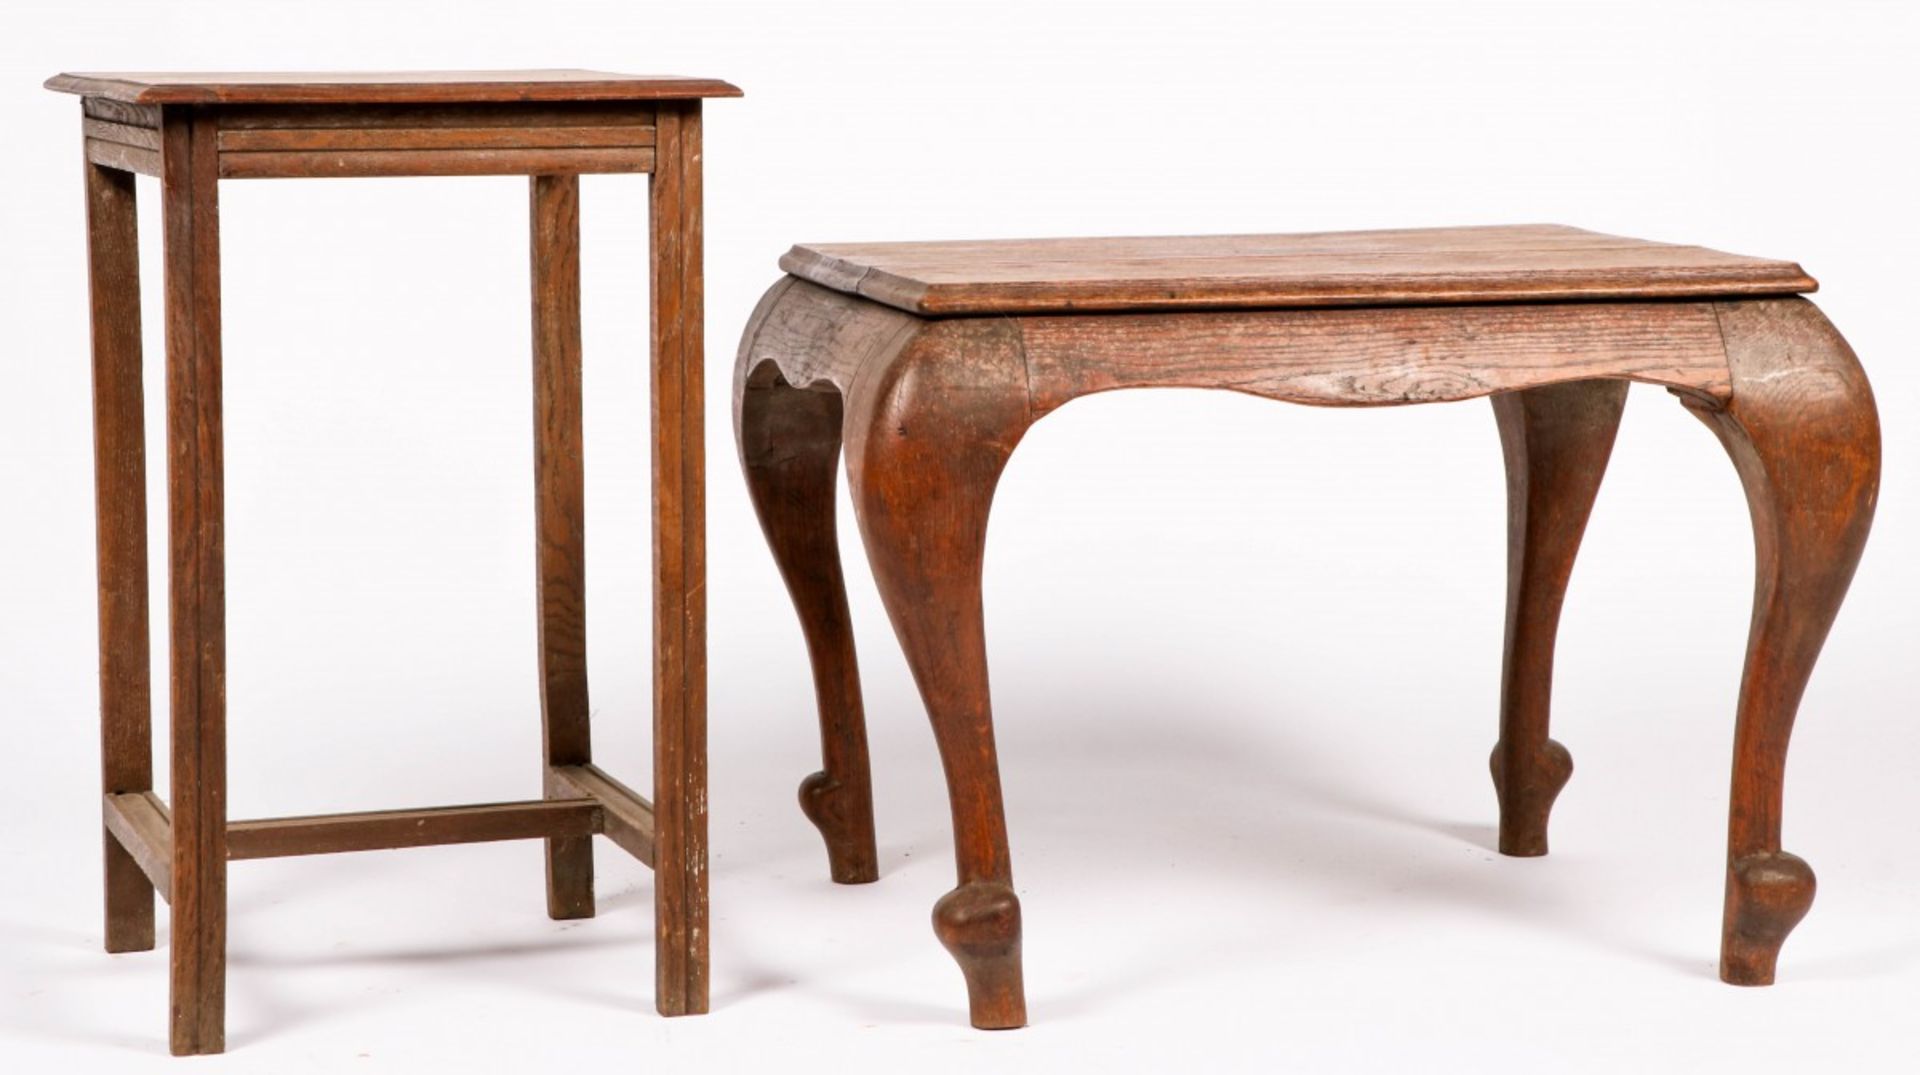 A lot consisting of two oakwood tables, 20th century. - Image 2 of 2